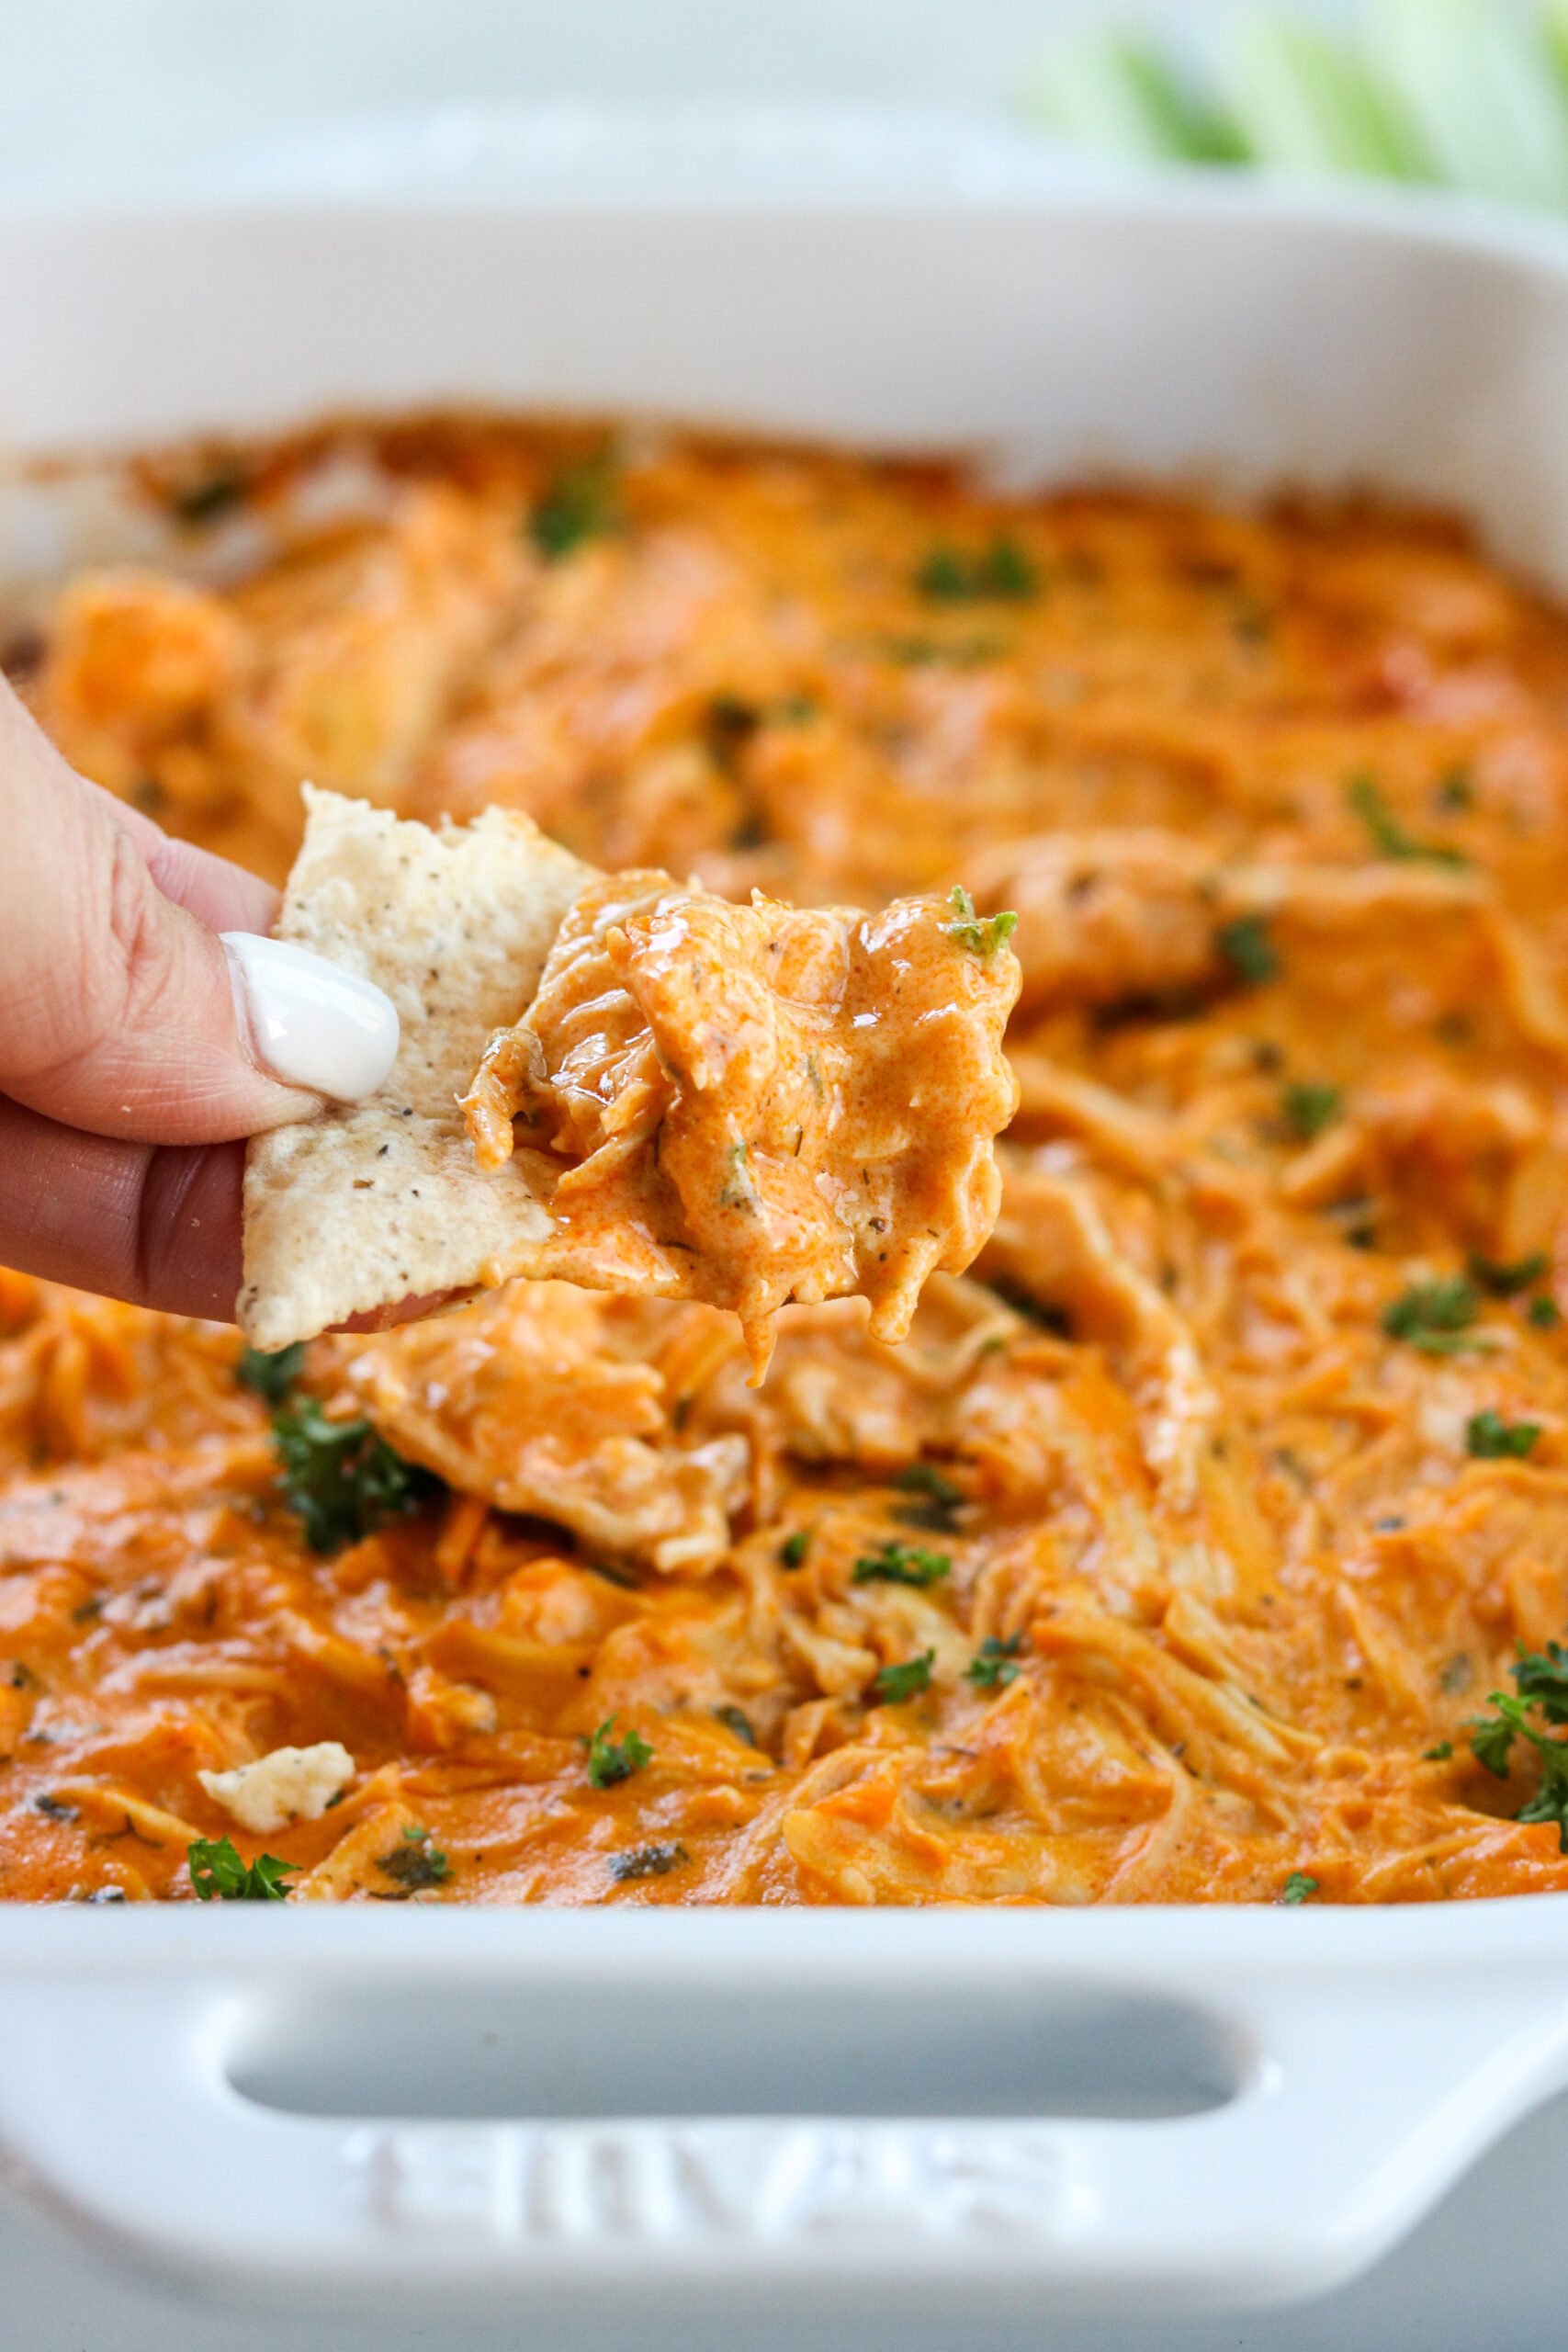 A hand with a chip scooping up some buffalo chicken dip